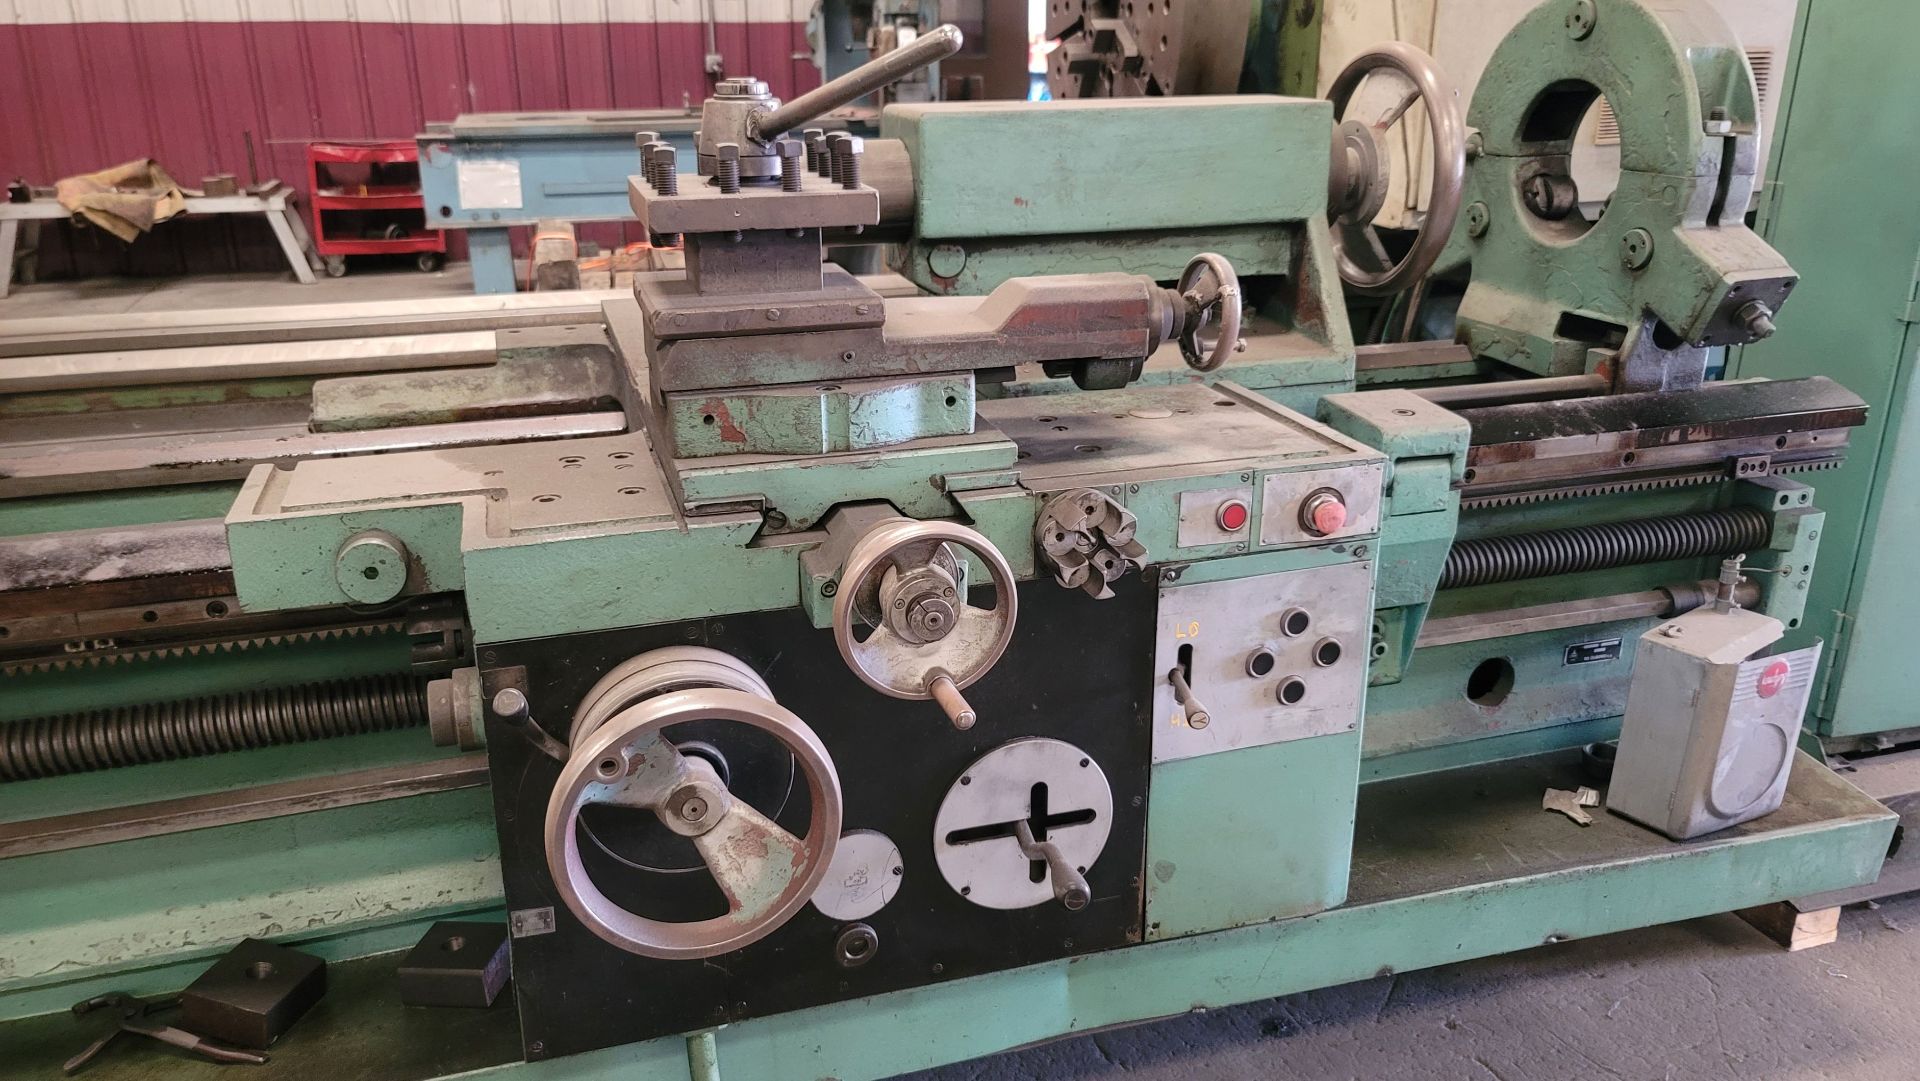 TOS ENGINE LATHE, MODEL SUS-63, 25" X 320", 26" 4-JAW CHUCK, TAILSTOCK, STEADY REST, S/N 436809 - Image 7 of 9